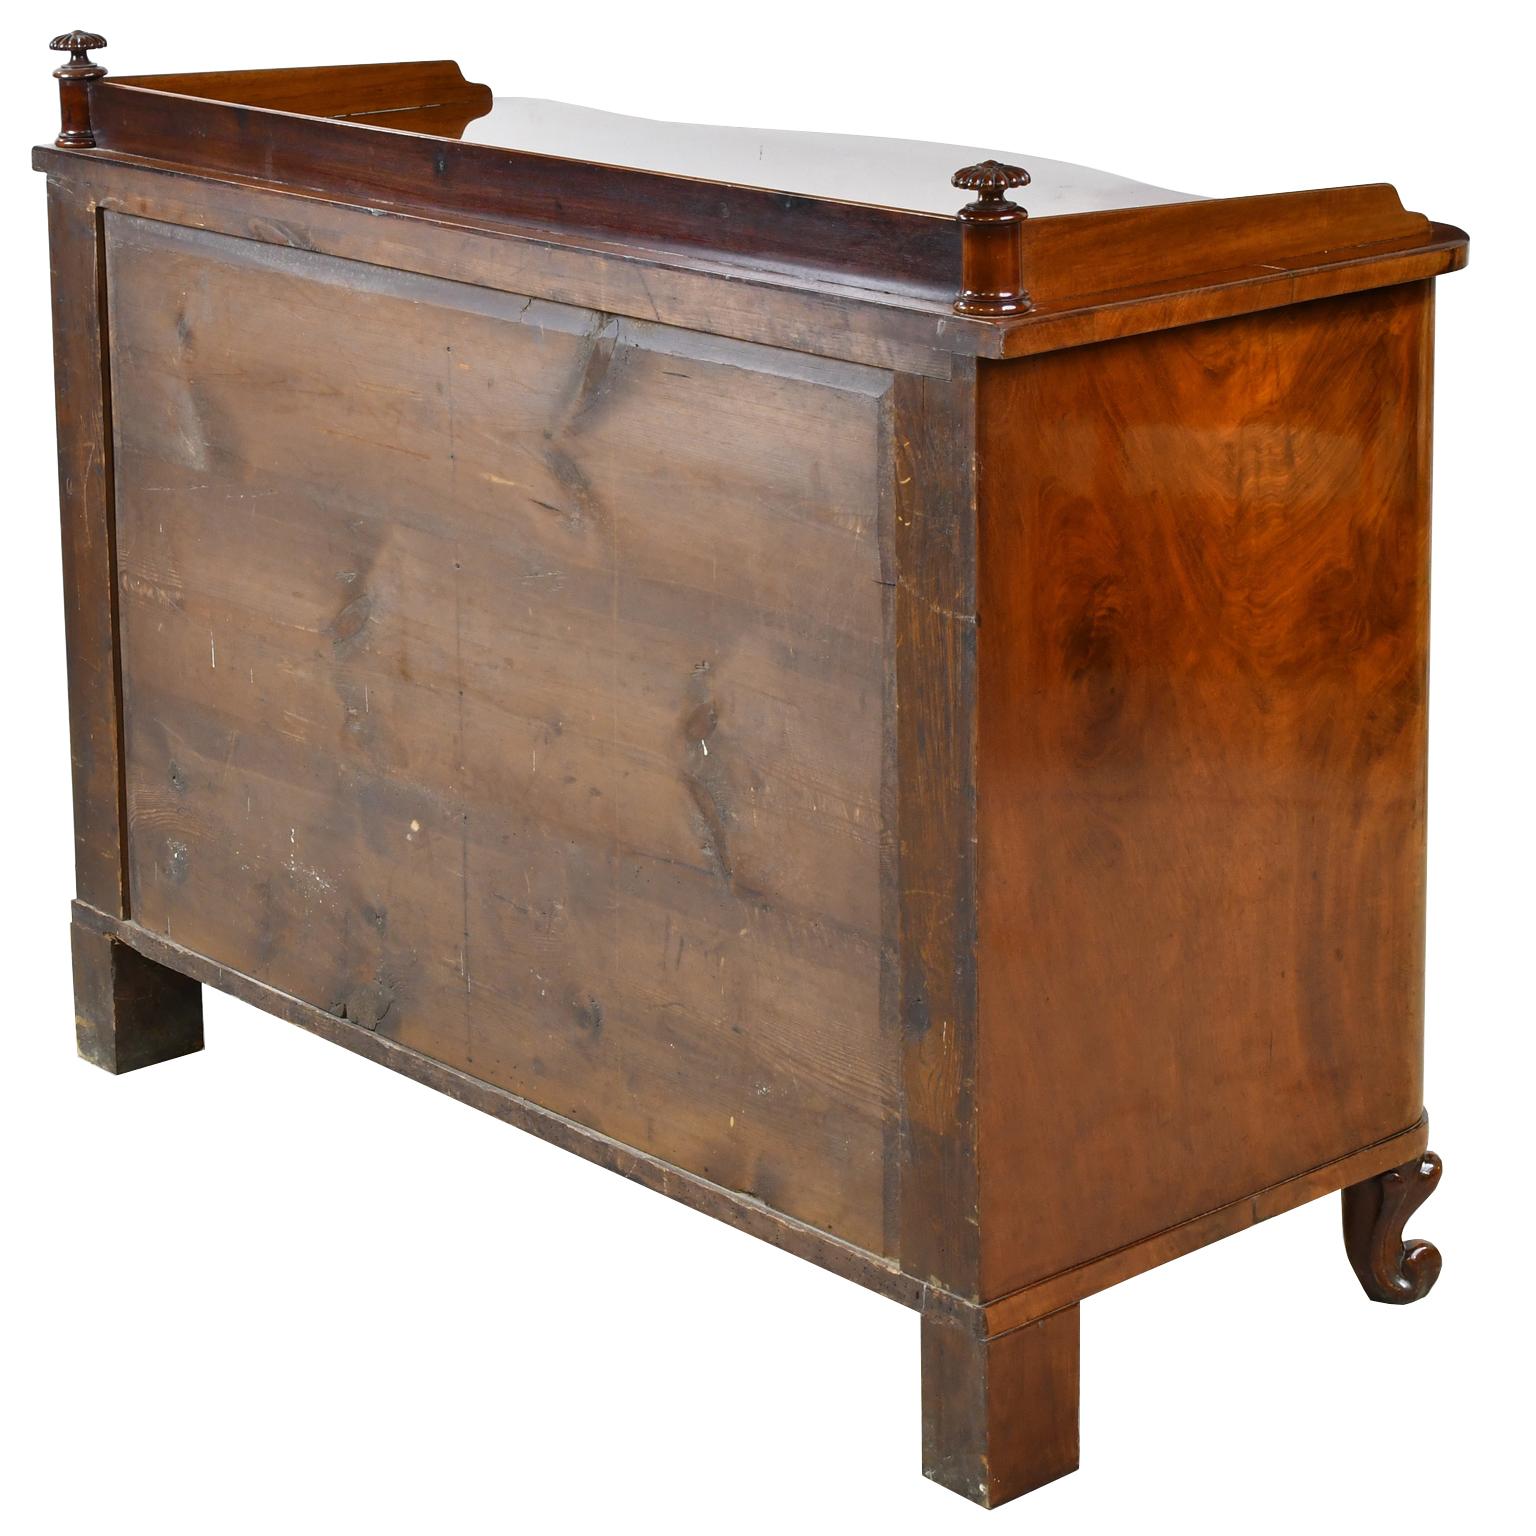 19th Century Christian VIII Serpentine-Front Sideboard in West Indies Mahogany, circa 1850 For Sale